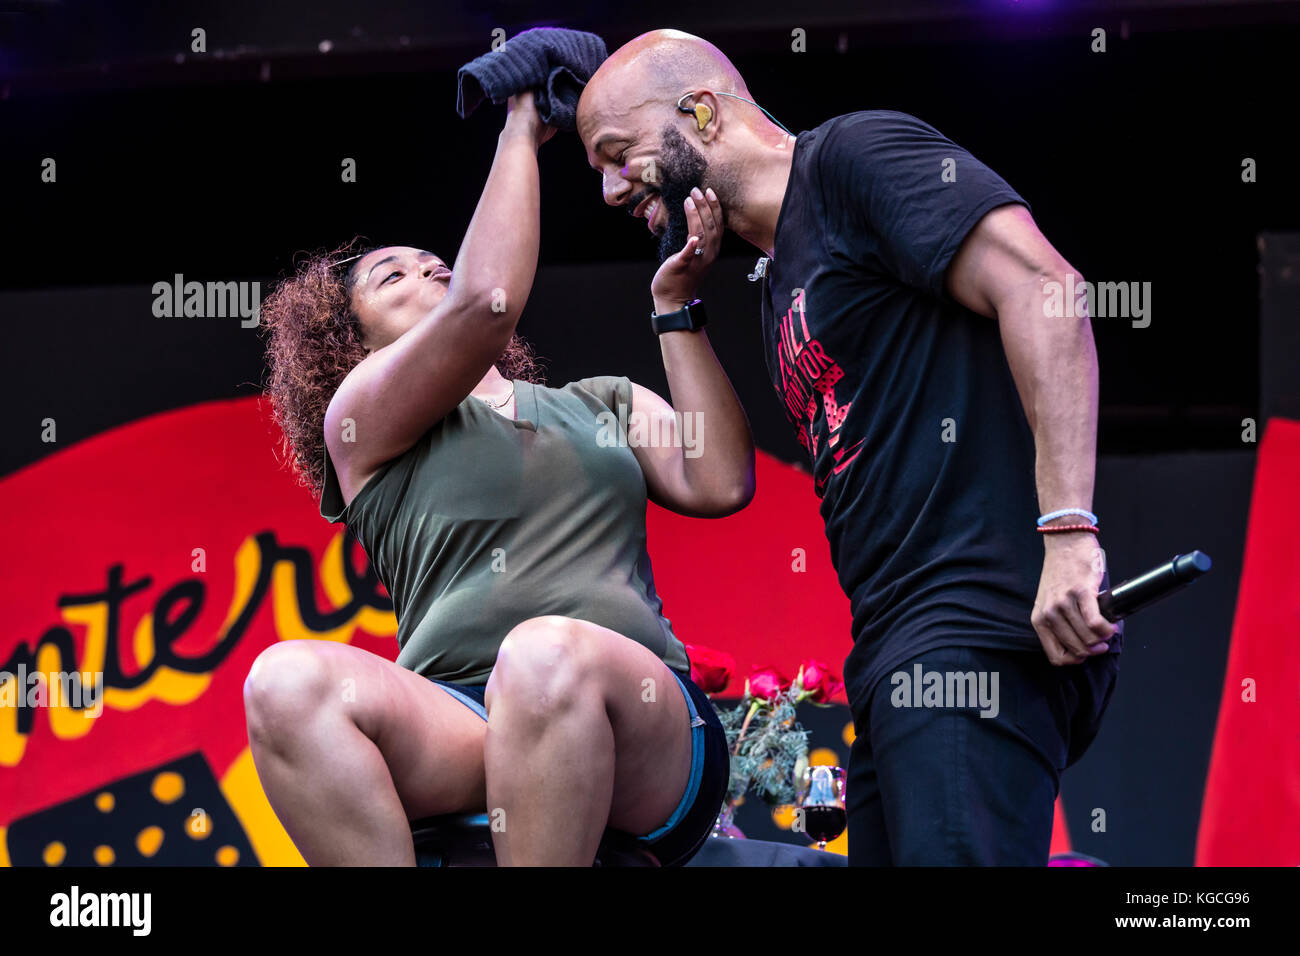 Hip hop artist COMMON honors women by singing to a fan brought up on stage - 60th MONTEREY JAZZ FESTIVAL, CALIFORNIA Stock Photo